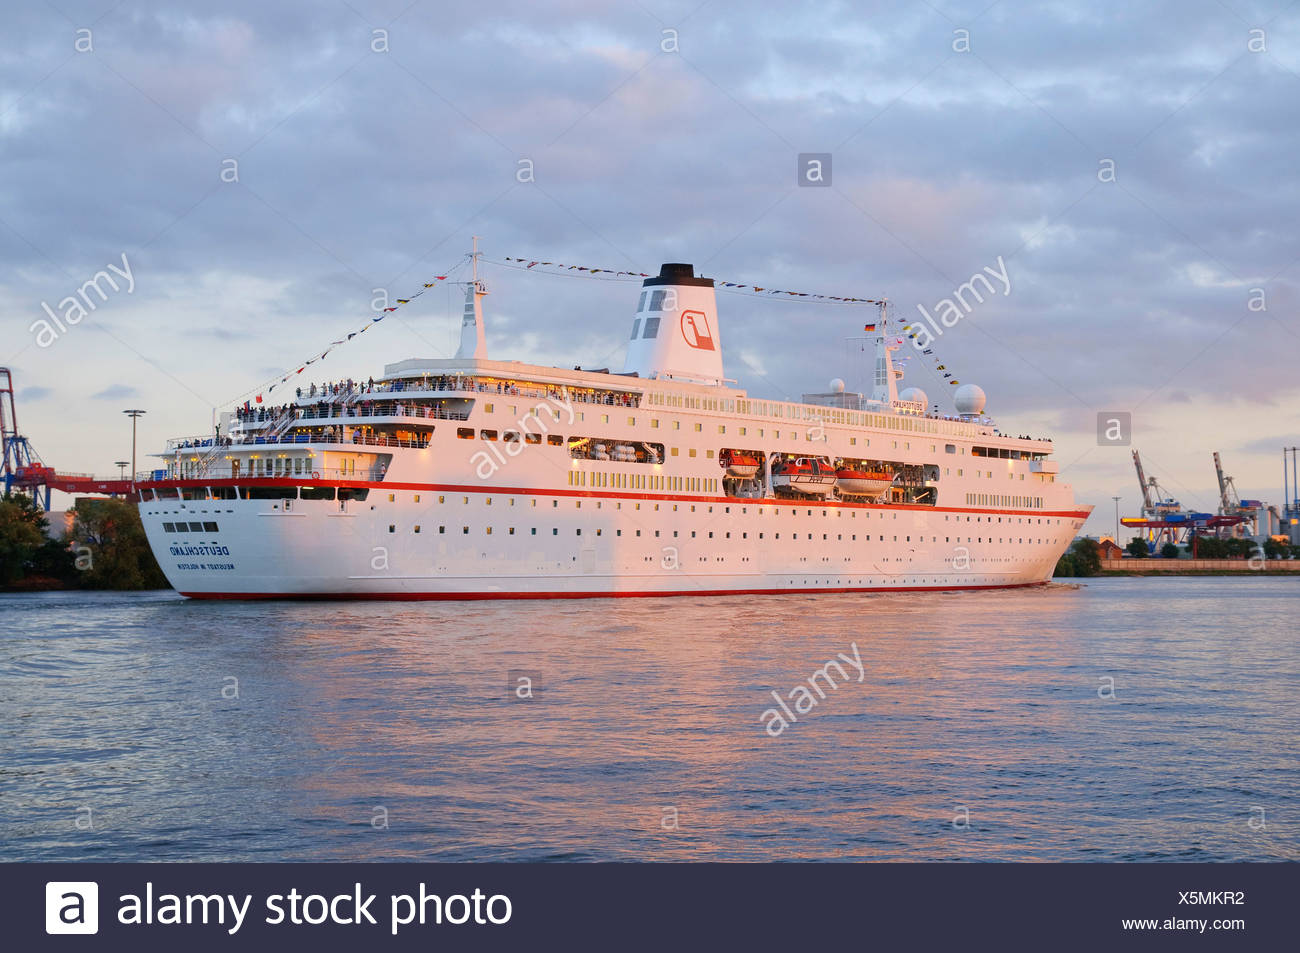 Ms Deutschland High Resolution Stock Photography and Images - Alamy